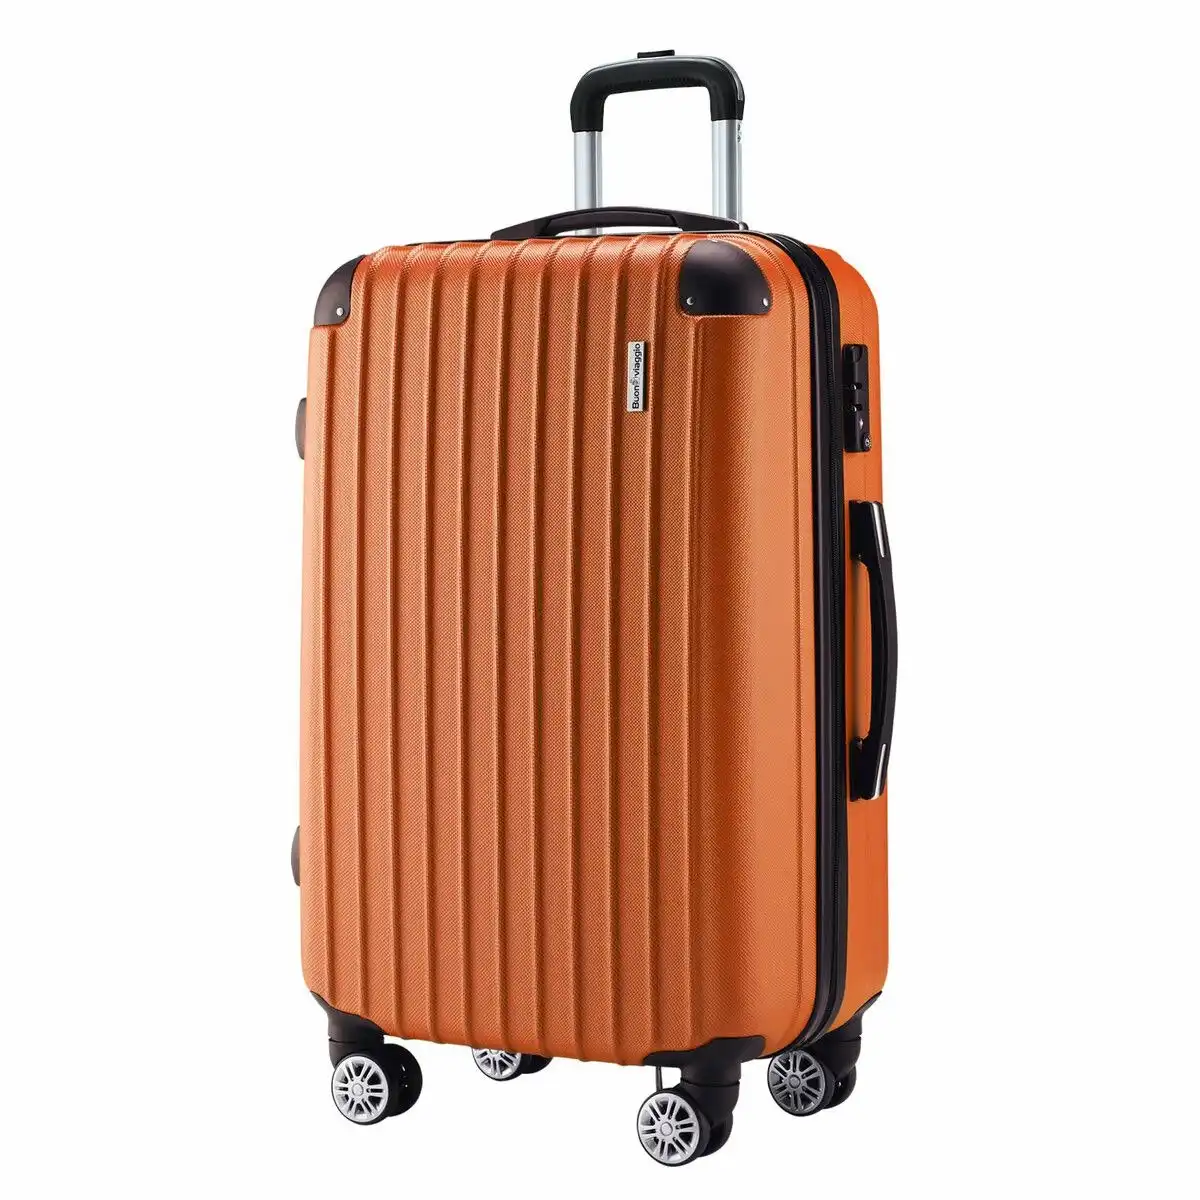 Buon Viaggio Carry On Luggage Suitcase Travel Travaller Bag Hard Shell Case Lightweight Travelling with Wheels Checked Rolling Trolley TSA Lock Orange